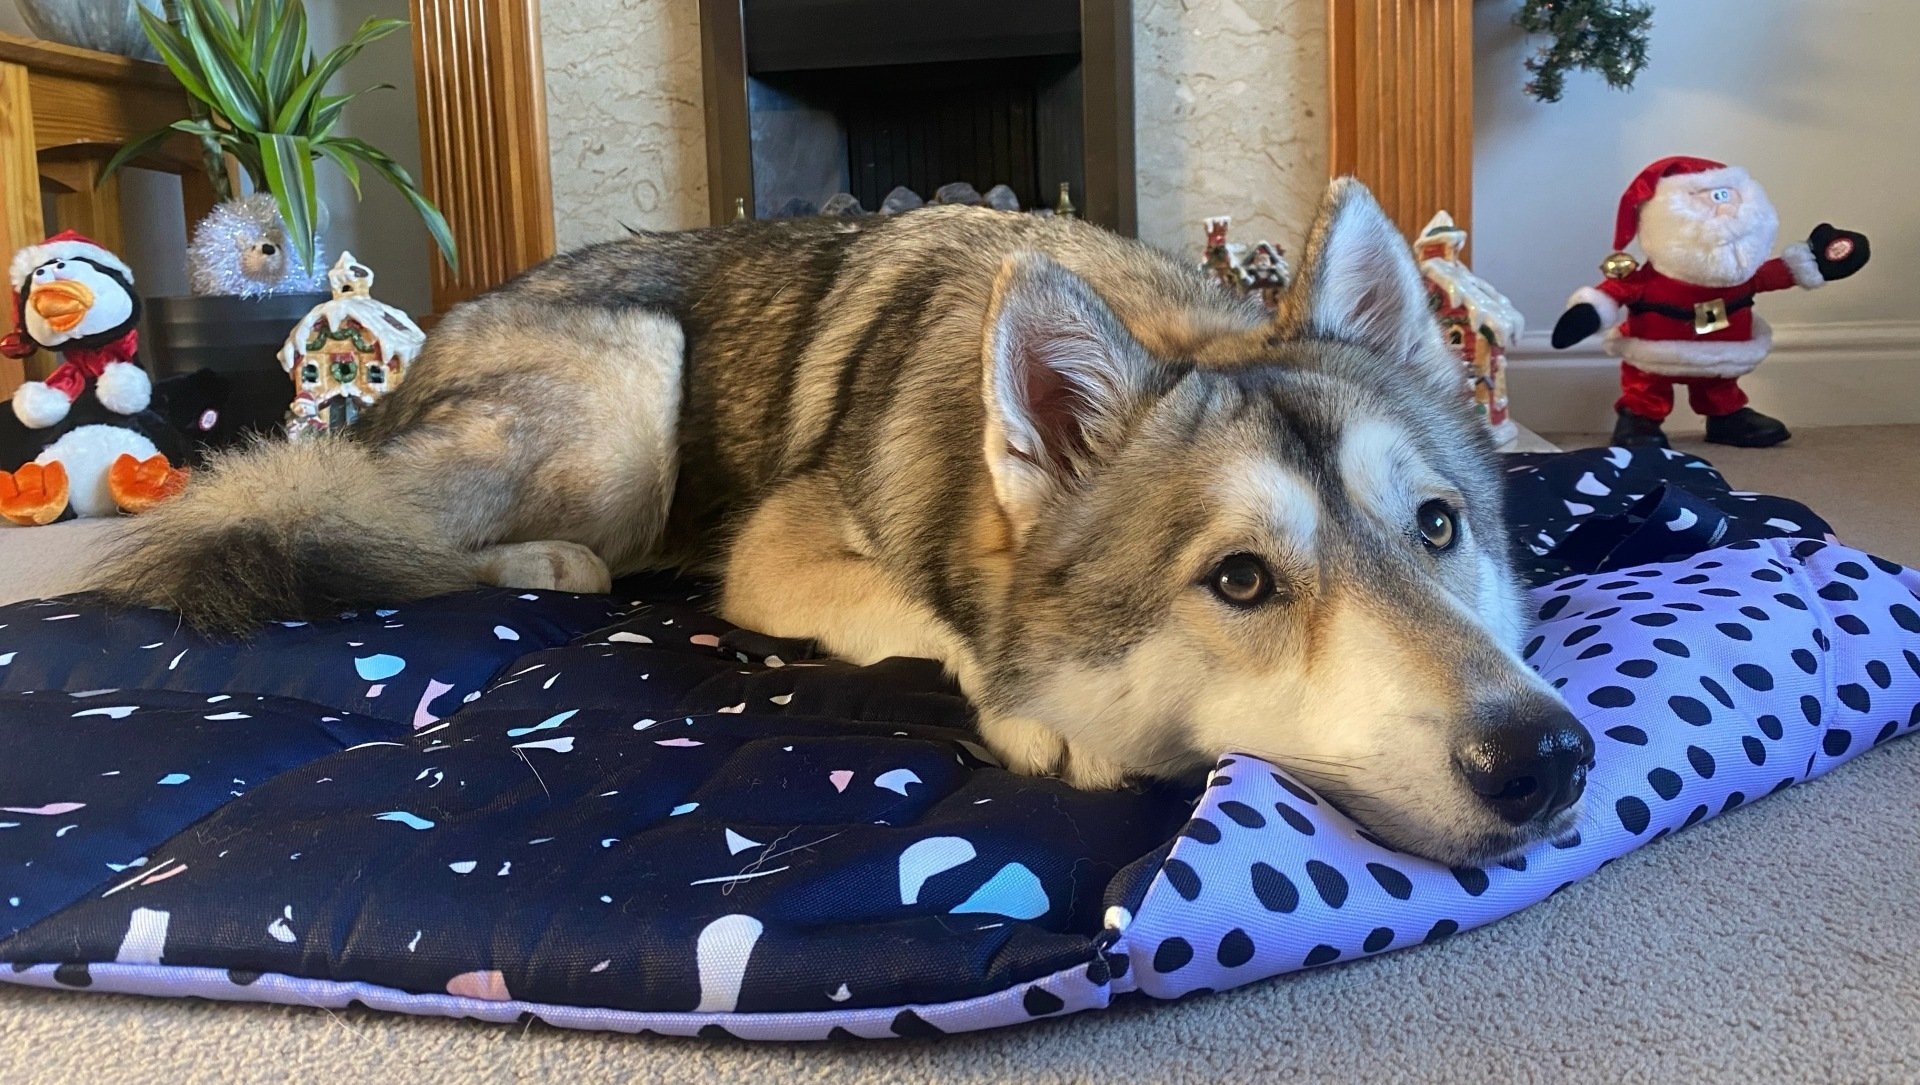 Large Wolfdog settled on Twiggy Tags Adventure Mat relaxing in front of fireplace